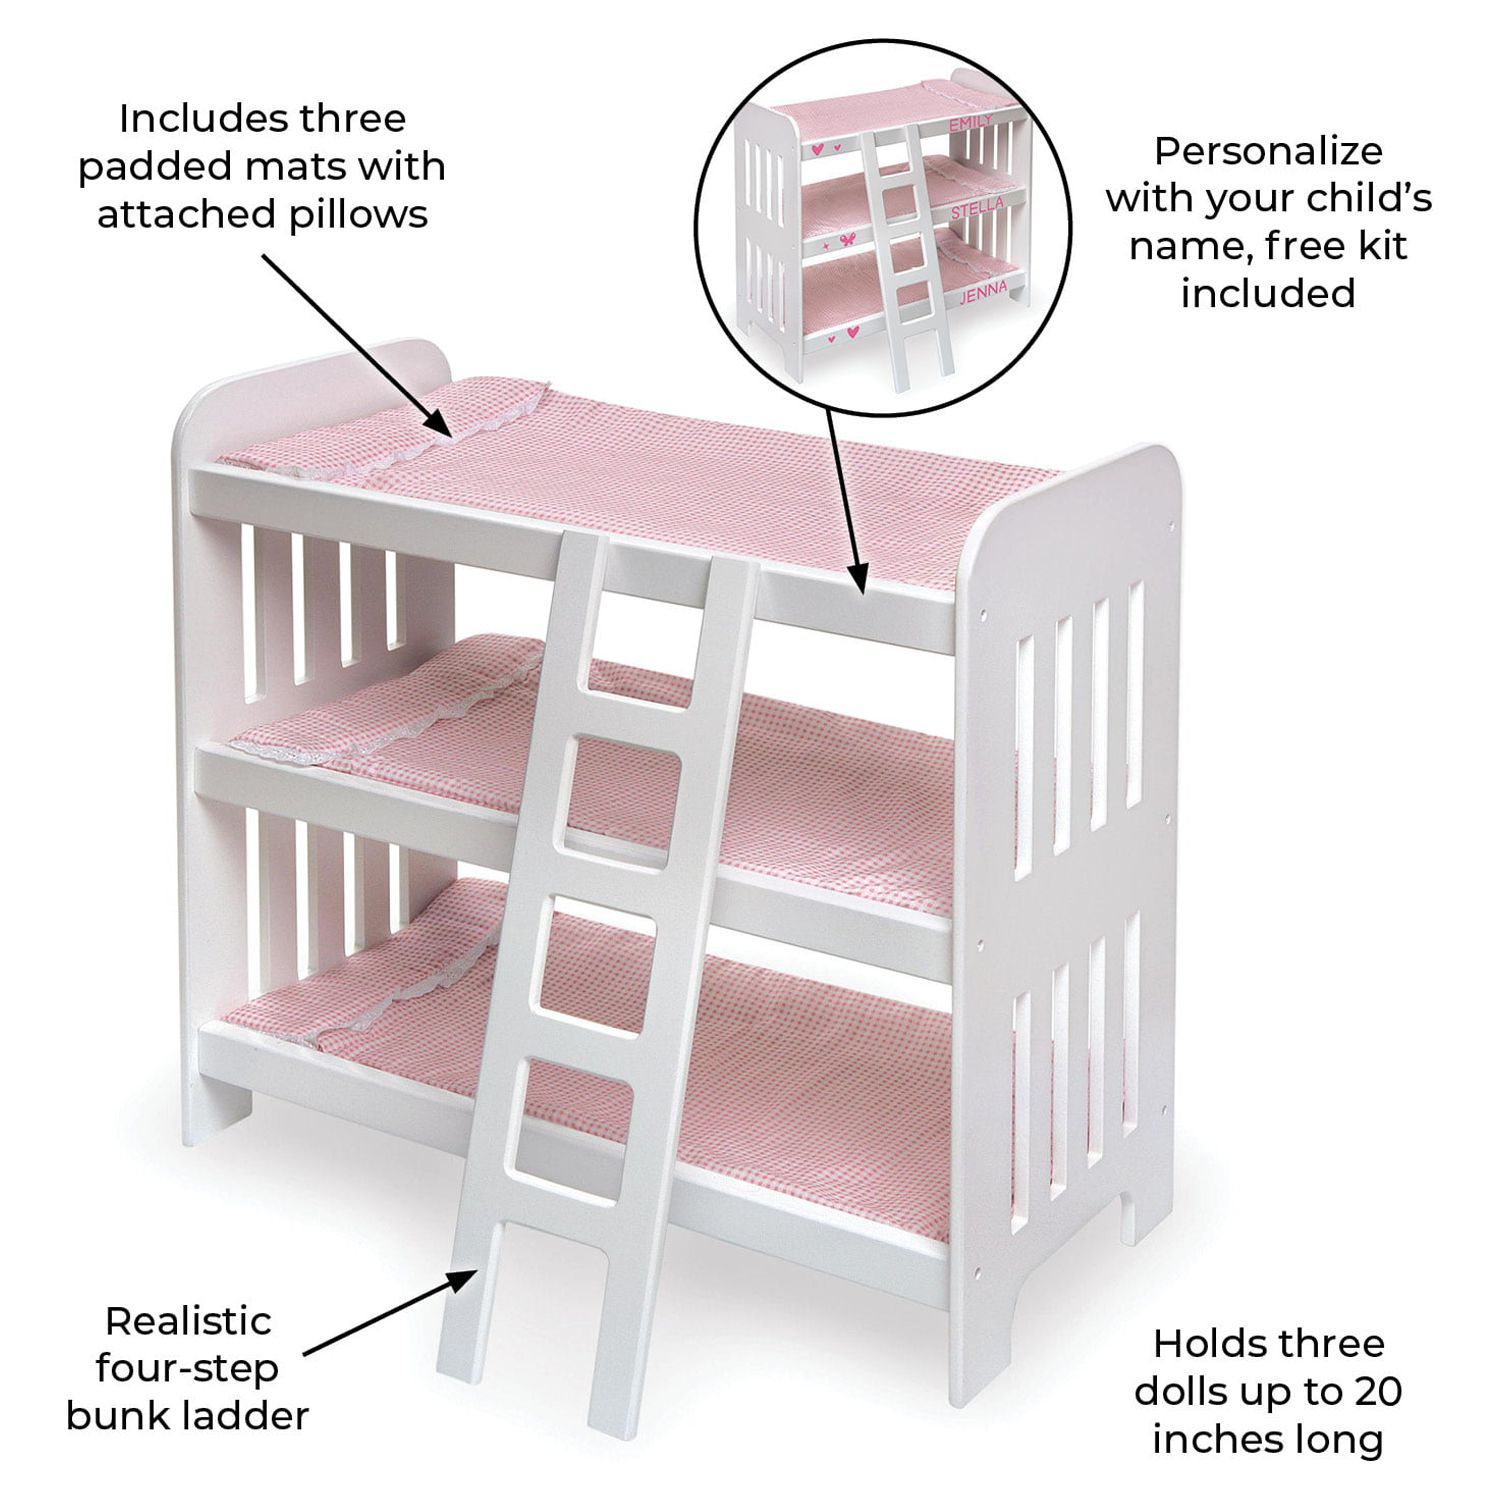 Badger Basket Triple Doll Bunk Bed with Ladder, Bedding, and Free Personalization Kit - Pink Gingham - image 4 of 12